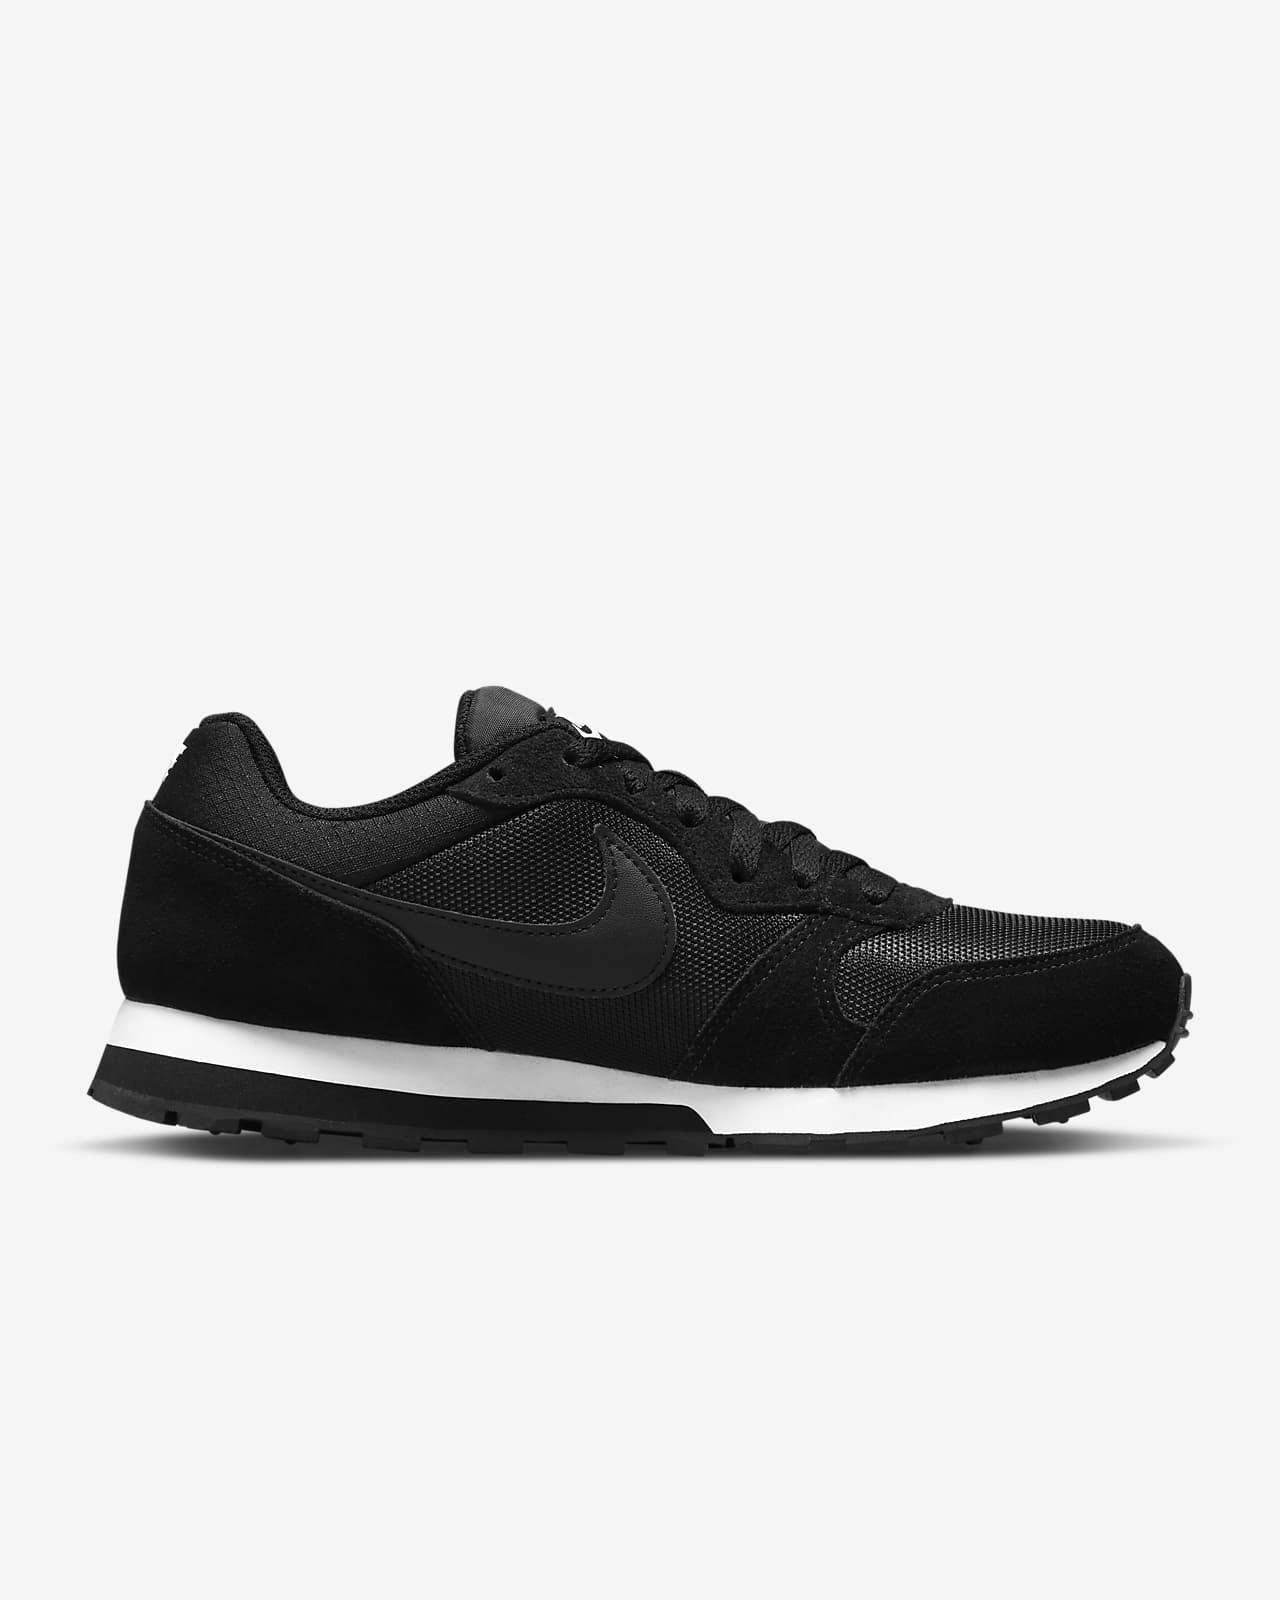 Nike Md Runner 2 Women's Top Sellers, UP TO 70% OFF